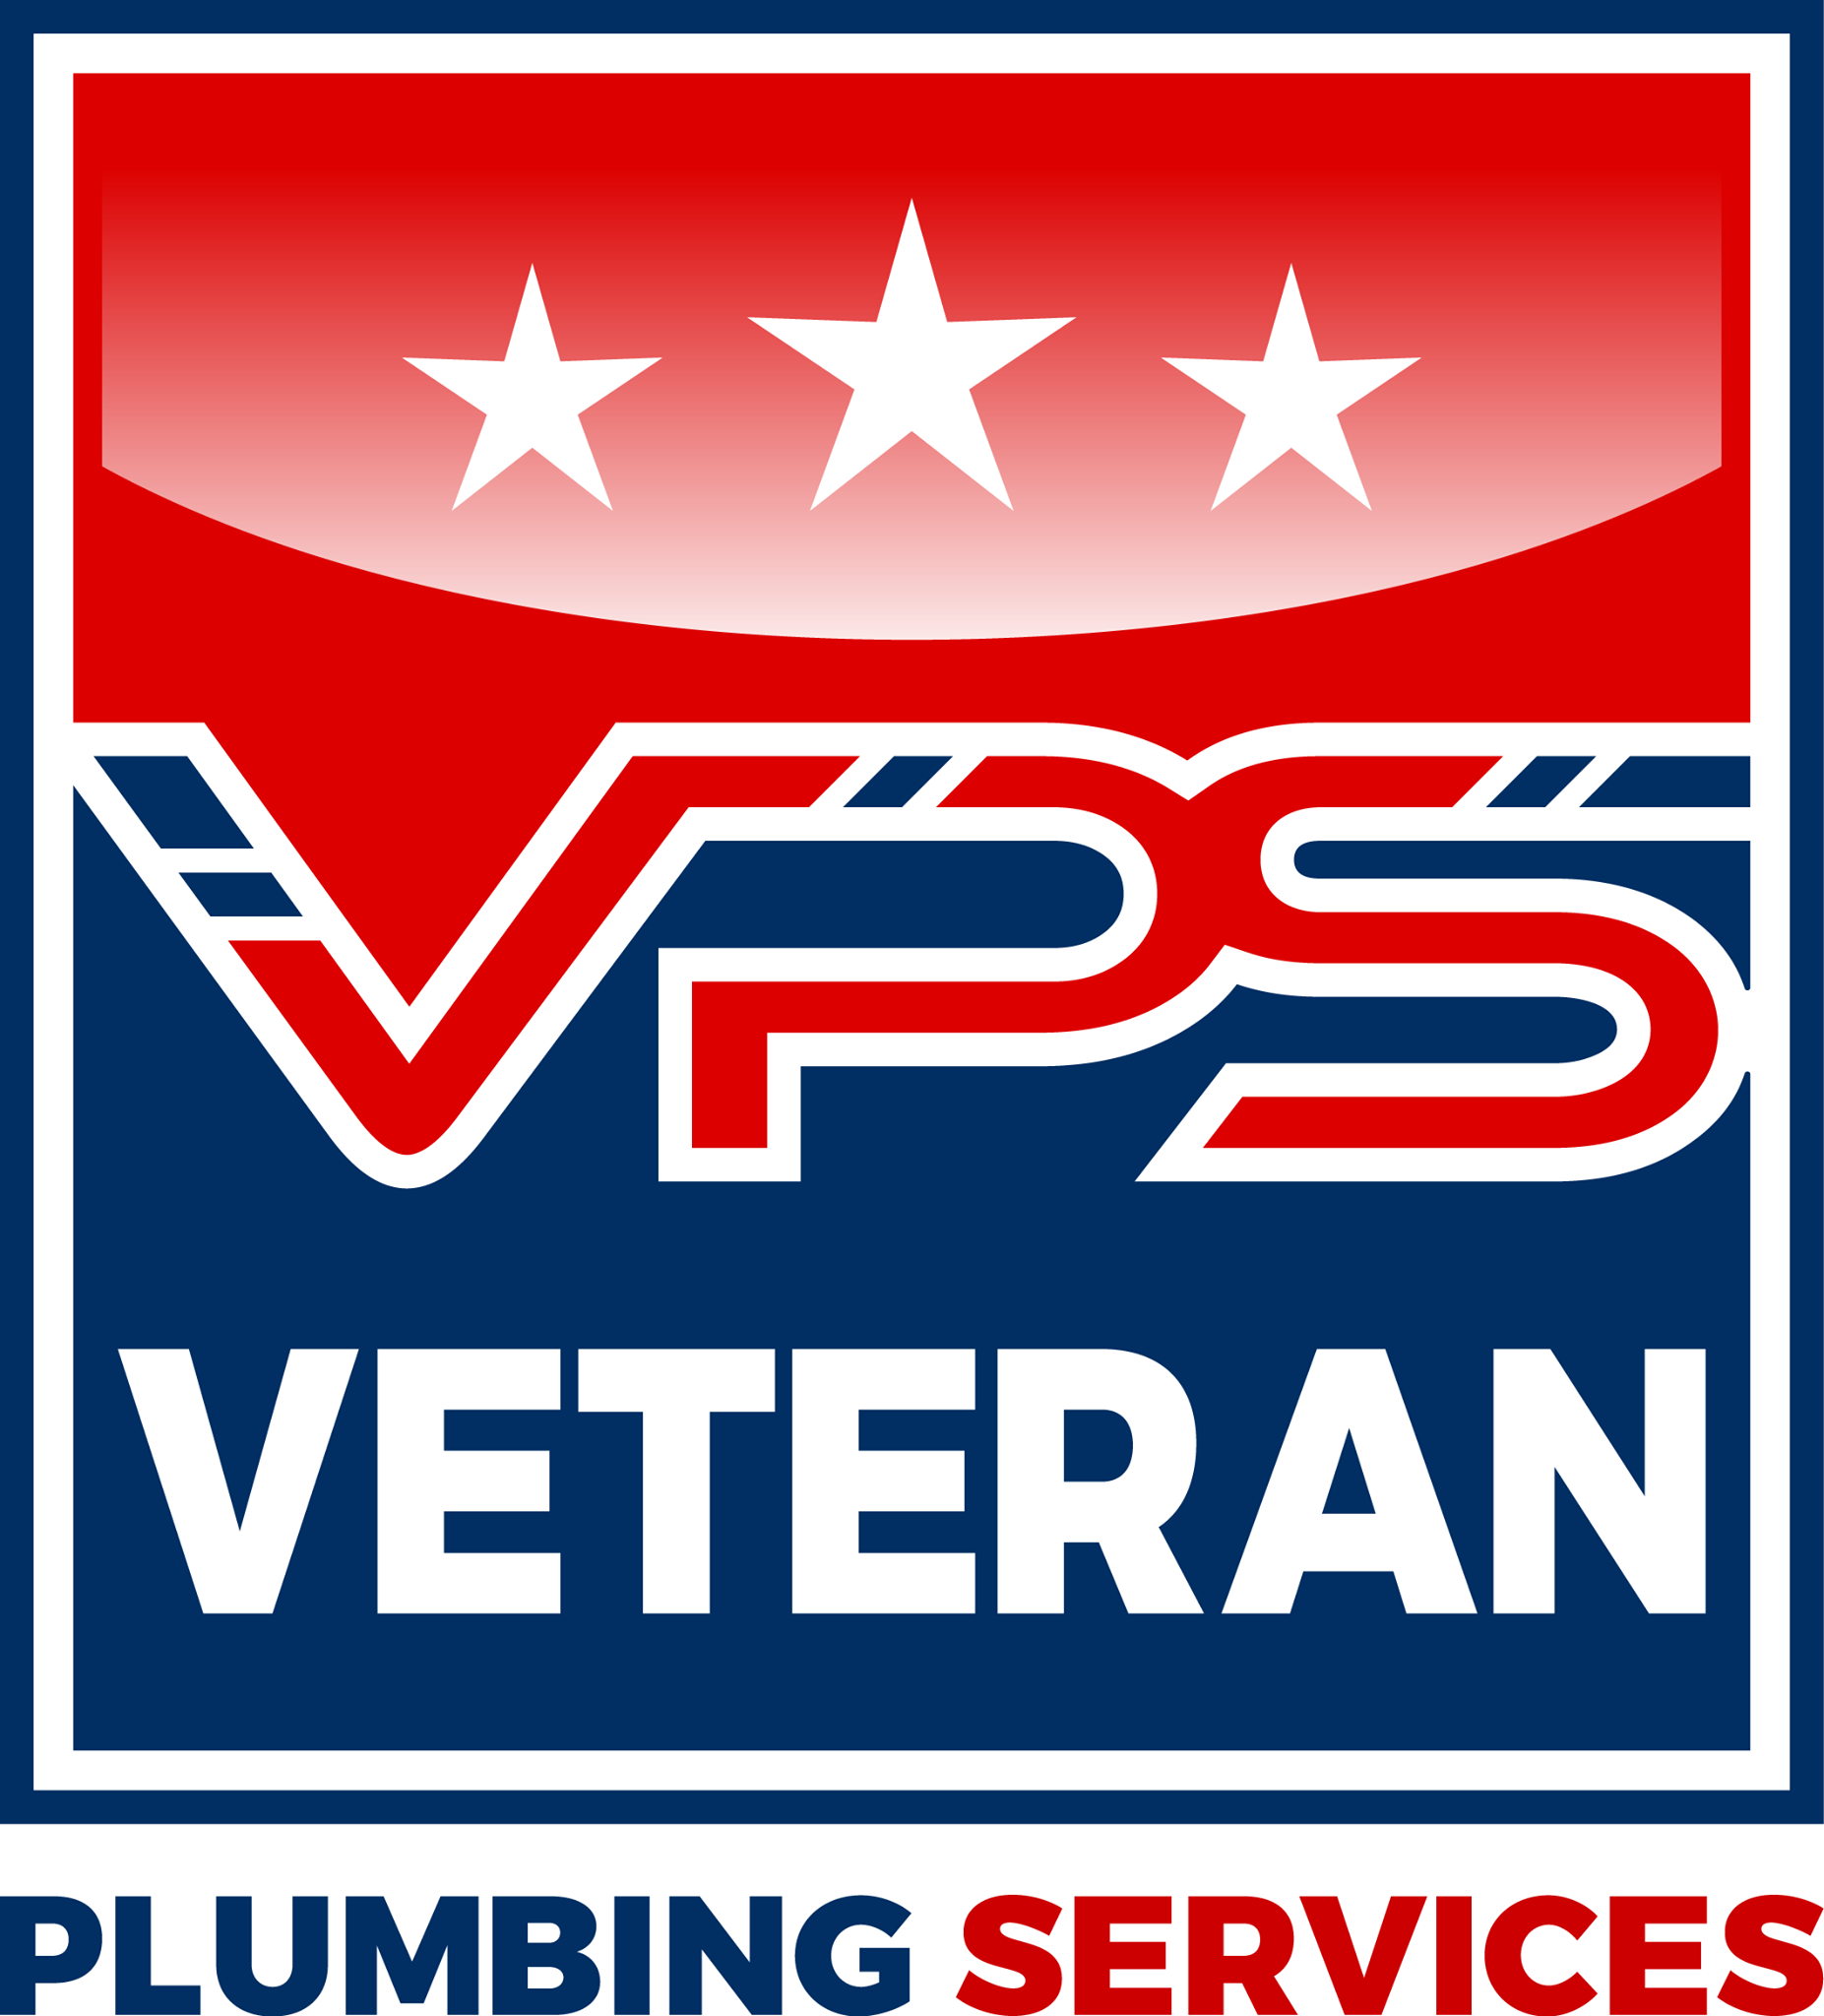 Veteran Plumbing Services is a Reliable Plumbing Company